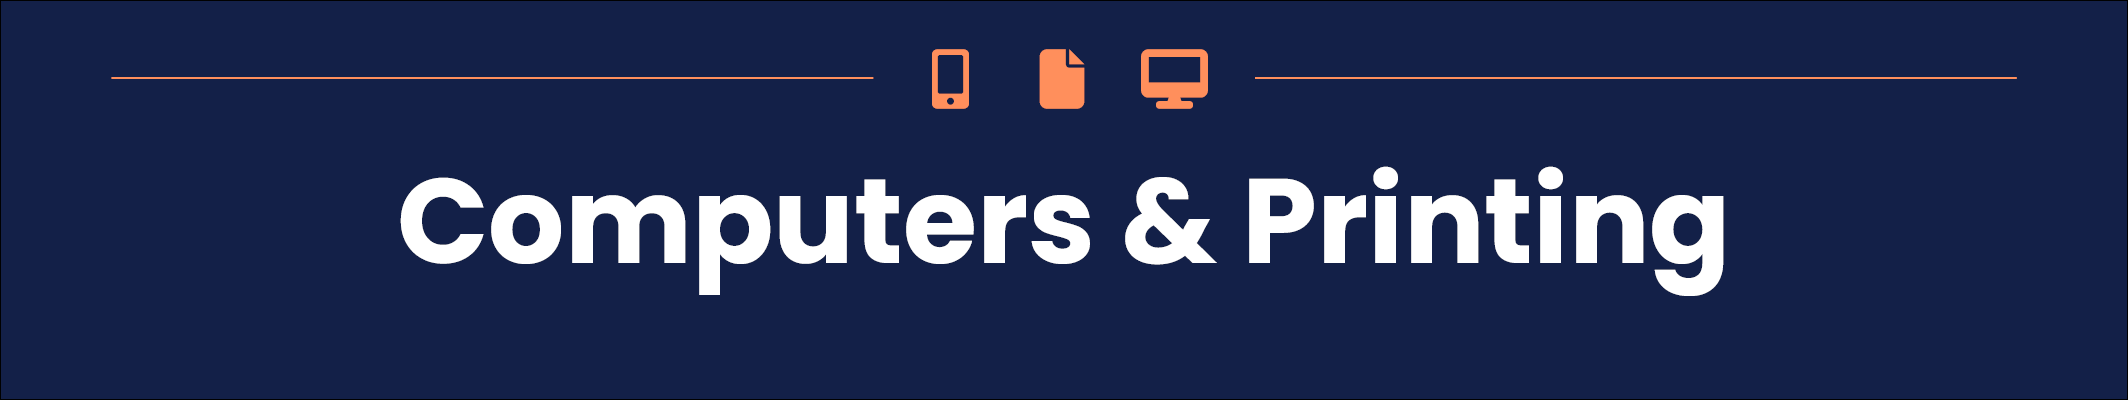 Computers and Printing Banner